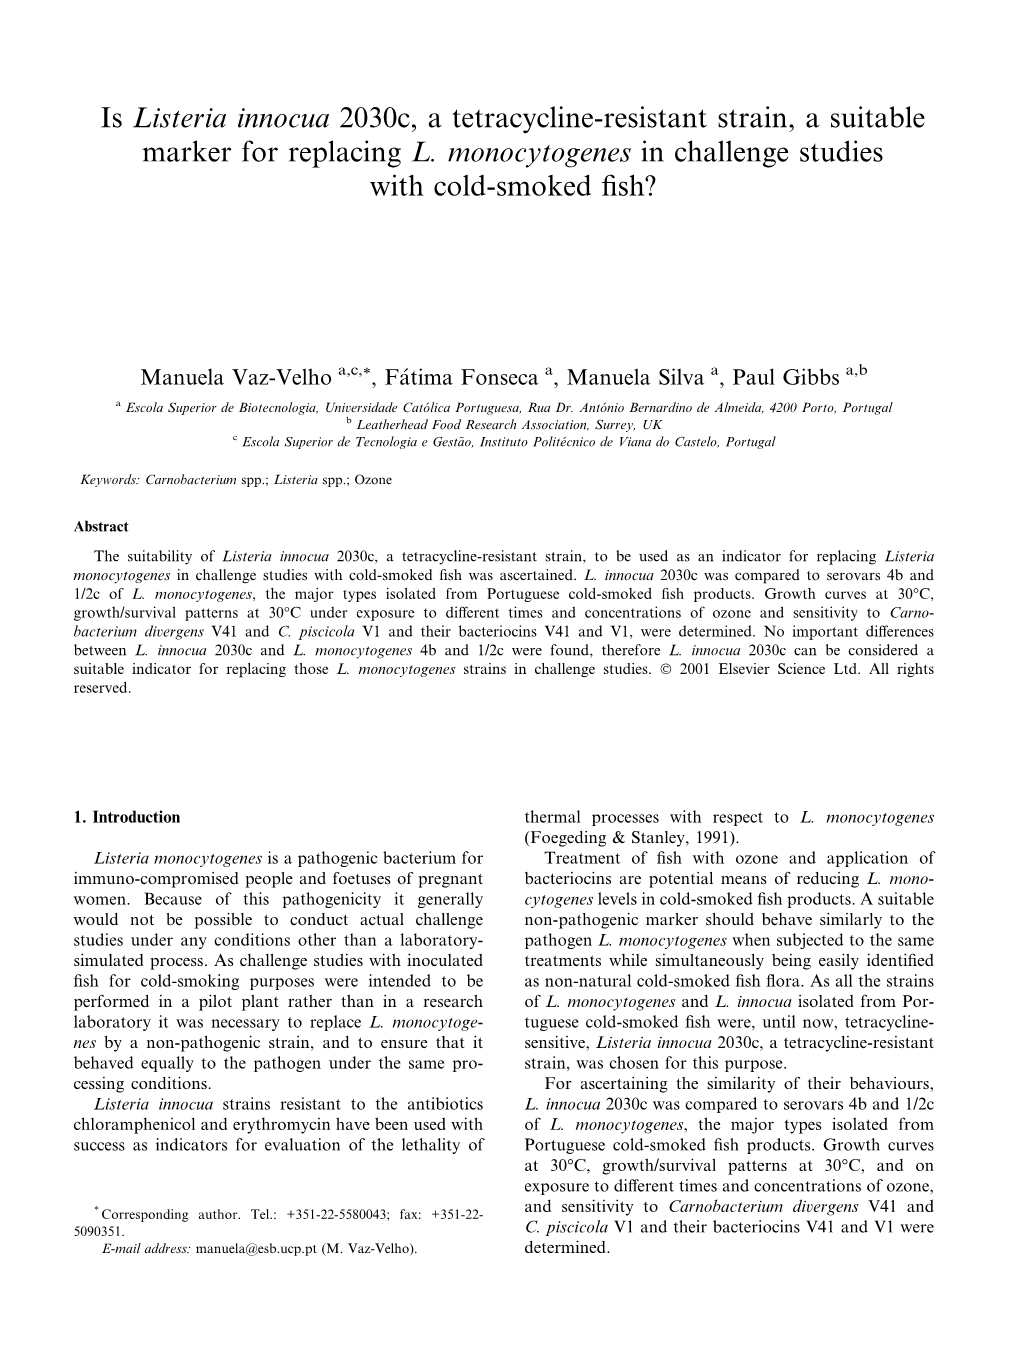 Is Listeria Innocua 2030C, a Tetracycline-Resistant Strain, a Suitable Marker for Replacing L